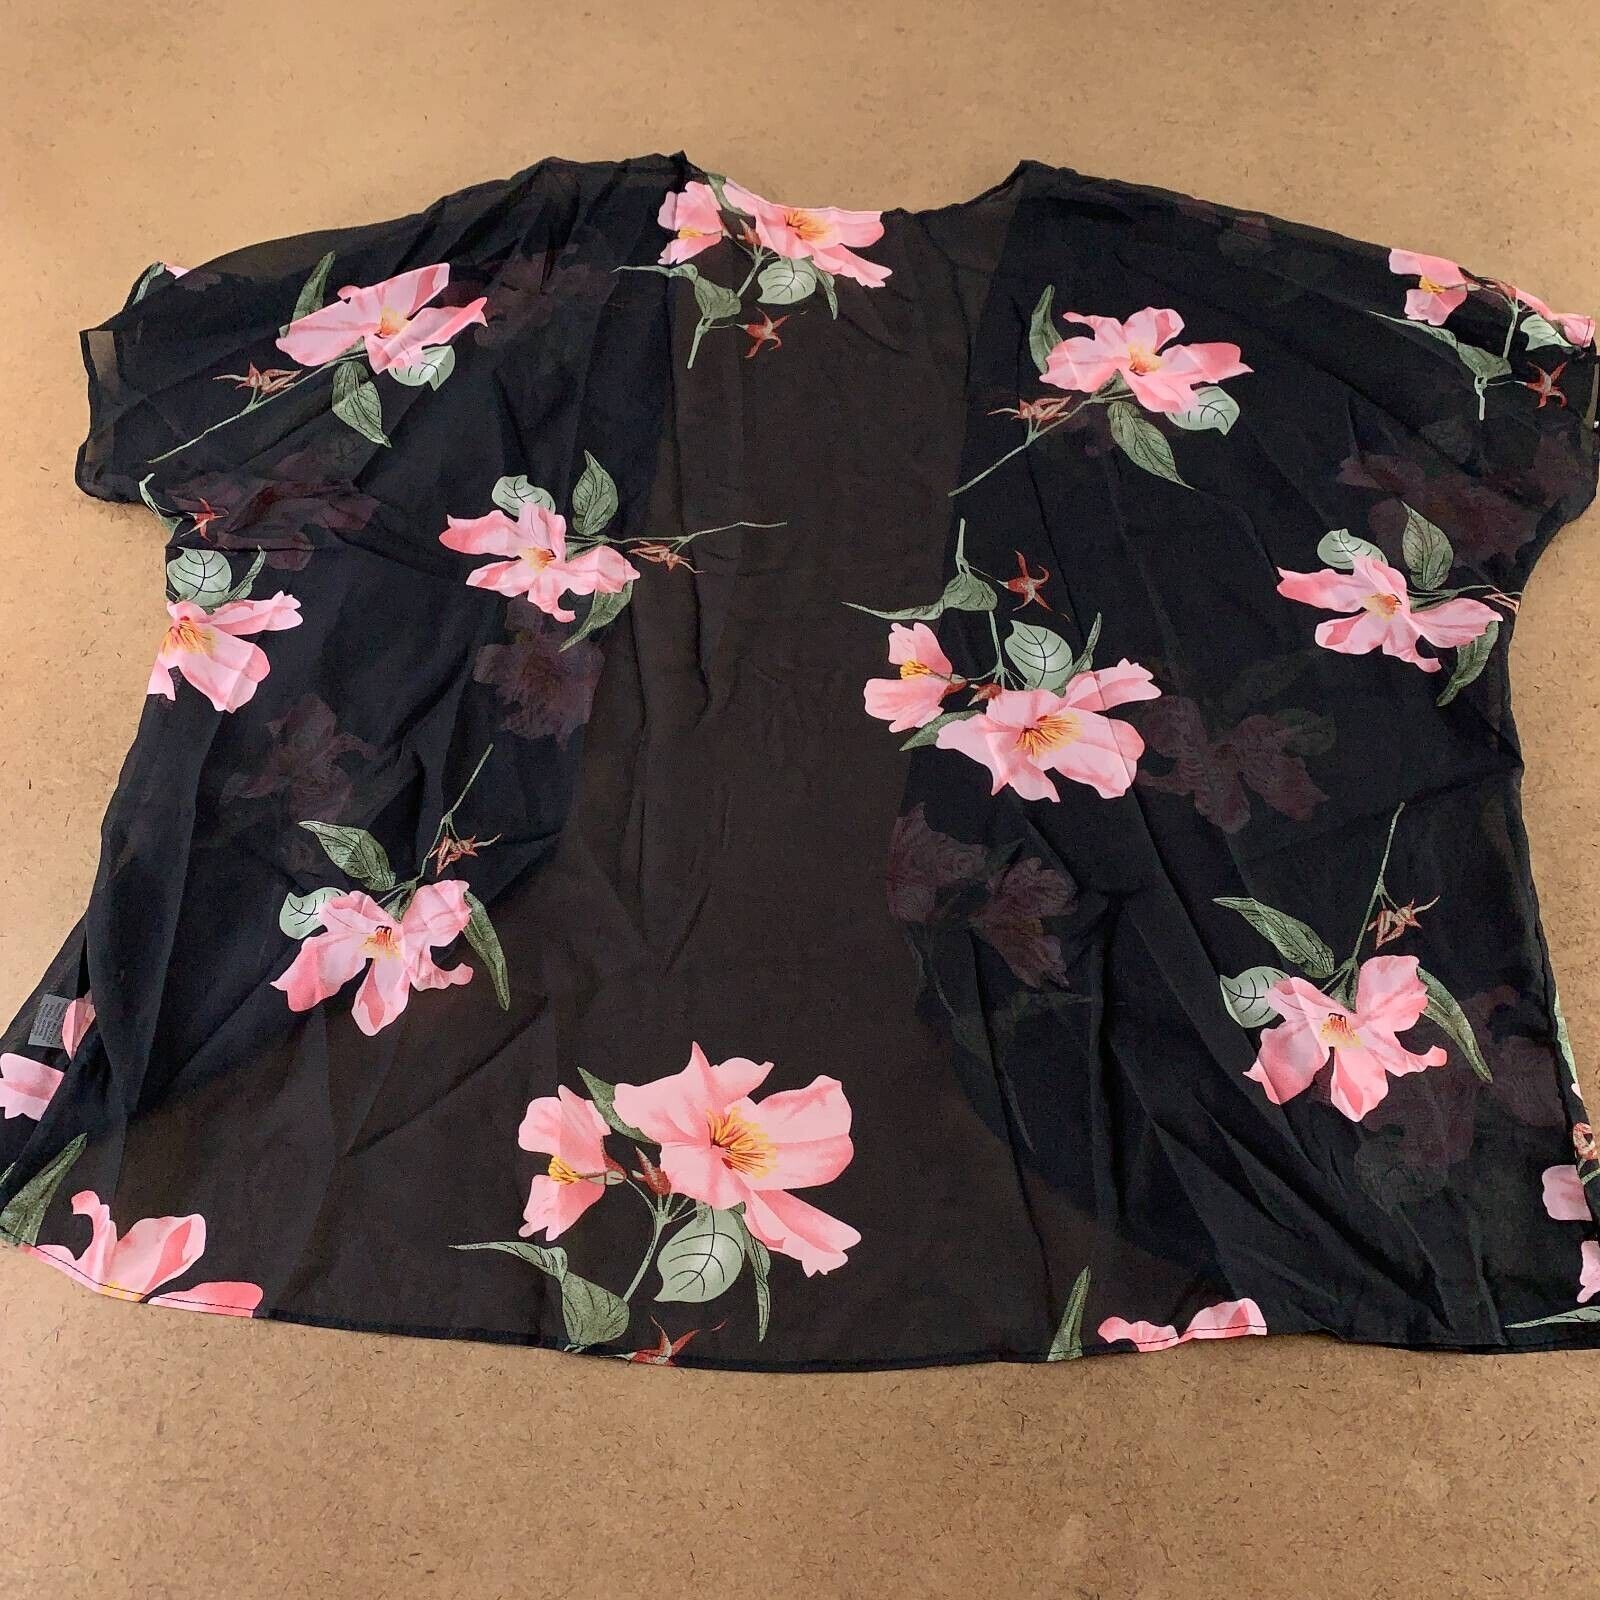 Shein Womens Kimono Cover Up Black Pink Floral Short Sleeve Open Front S New | eBay AU